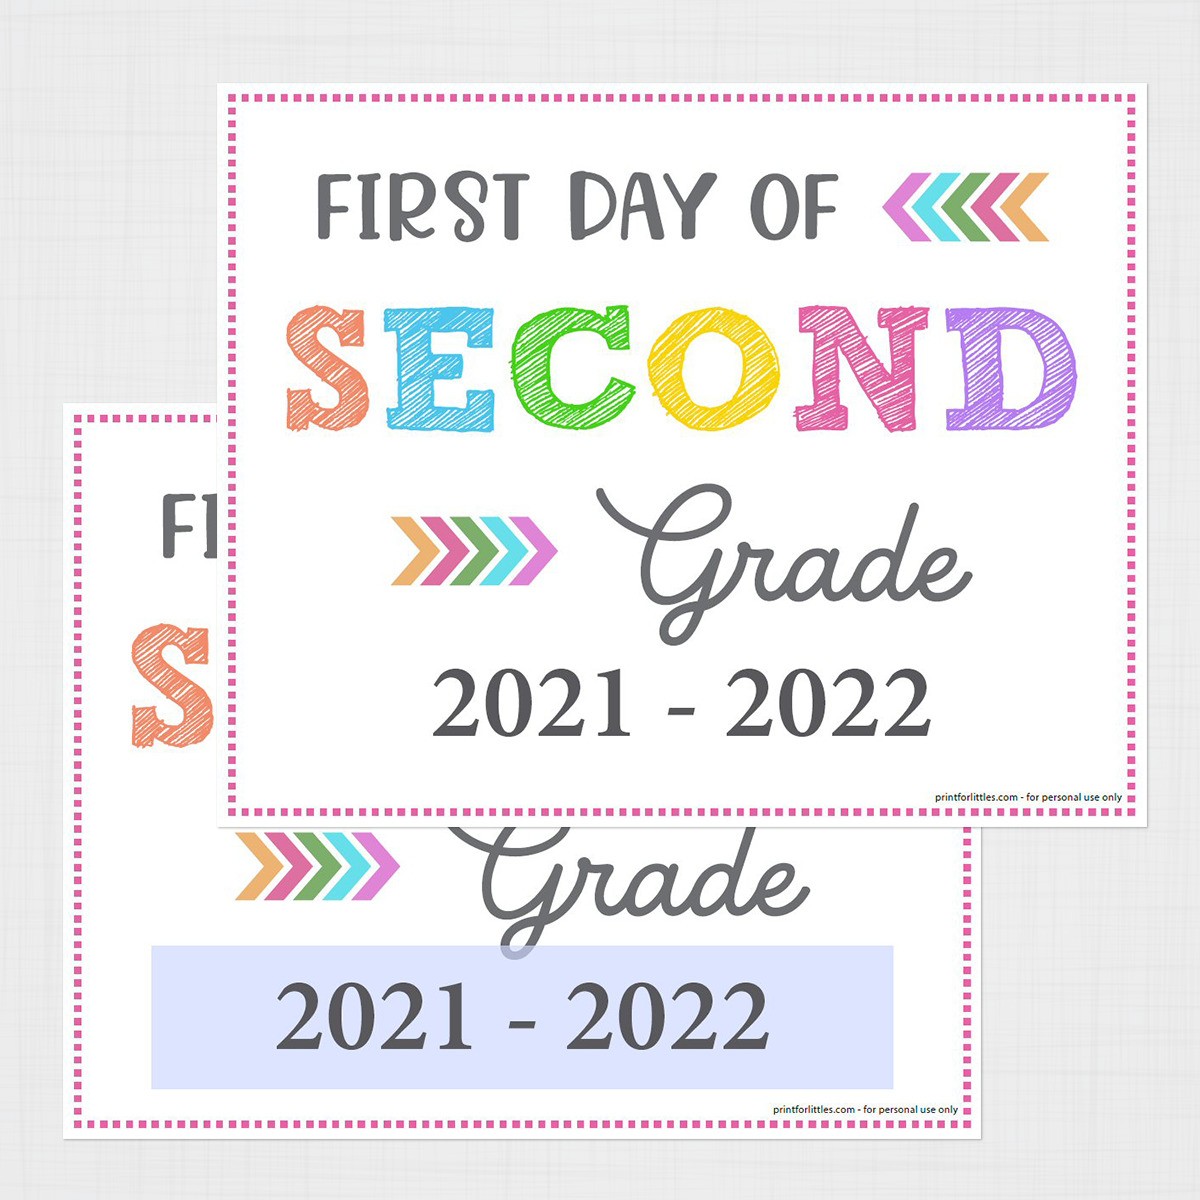 First Day Of Second Grade Printable